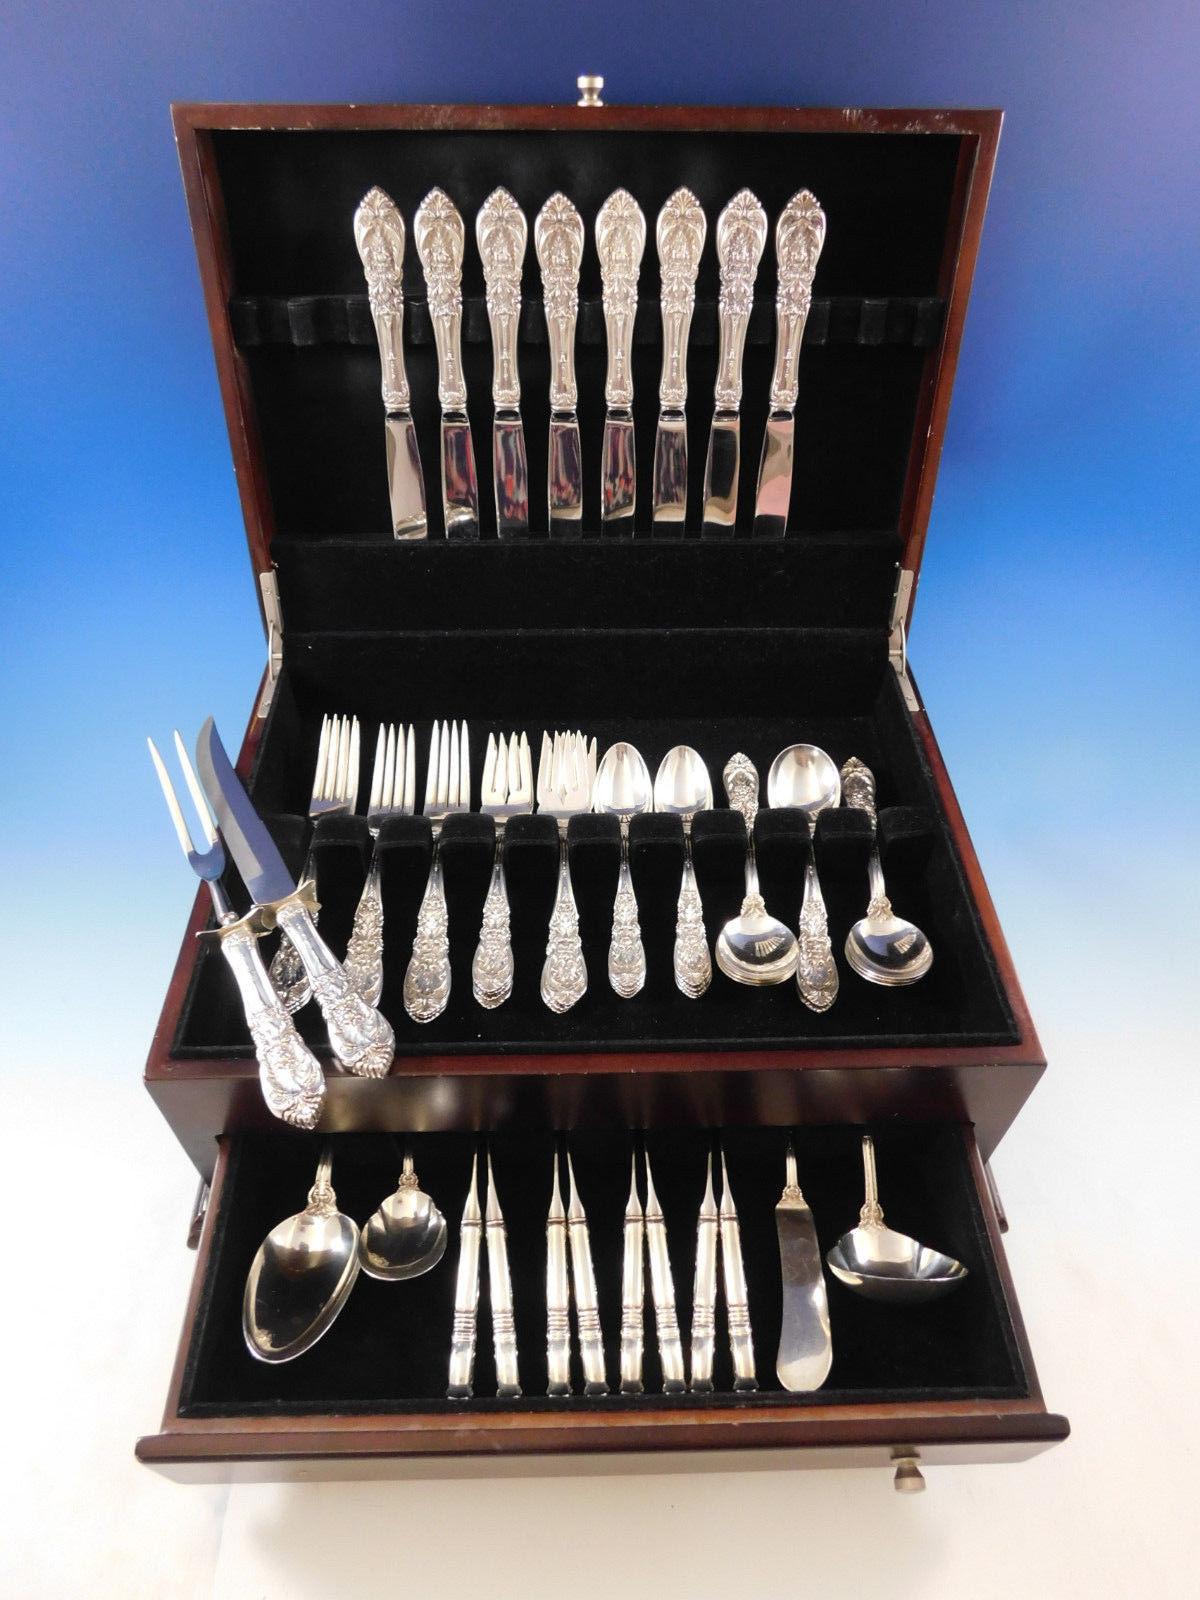 Richelieu by International sterling silver flatware set, 54 pieces. This set includes:

Eight knives, 9 1/4